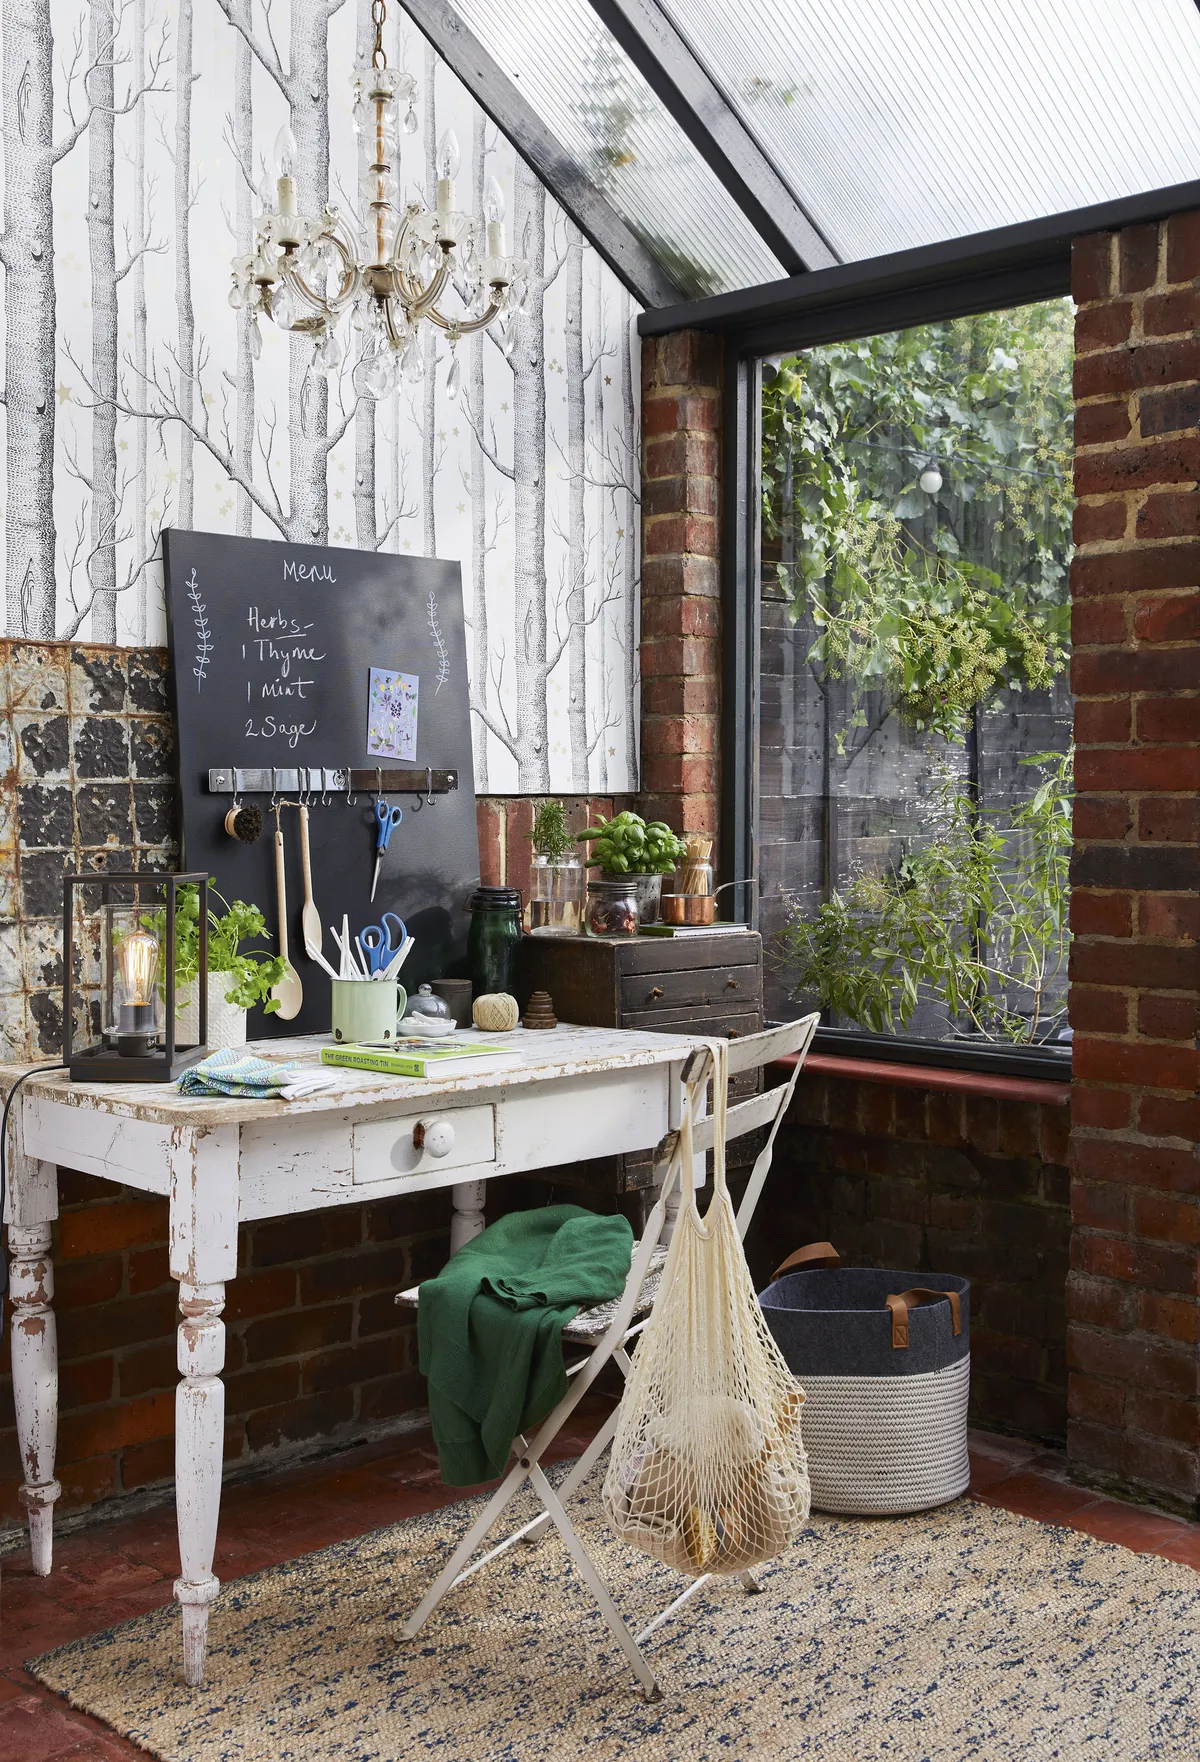 A clever mix of recycled and online bargain buys has helped transform a damp and dreary lean-to into a characterful office space, overlooking the garden. Kiara only needed a single roll of designer wallpaper to cover up an unattractive section of wall and give her new-look room an injection of print and character